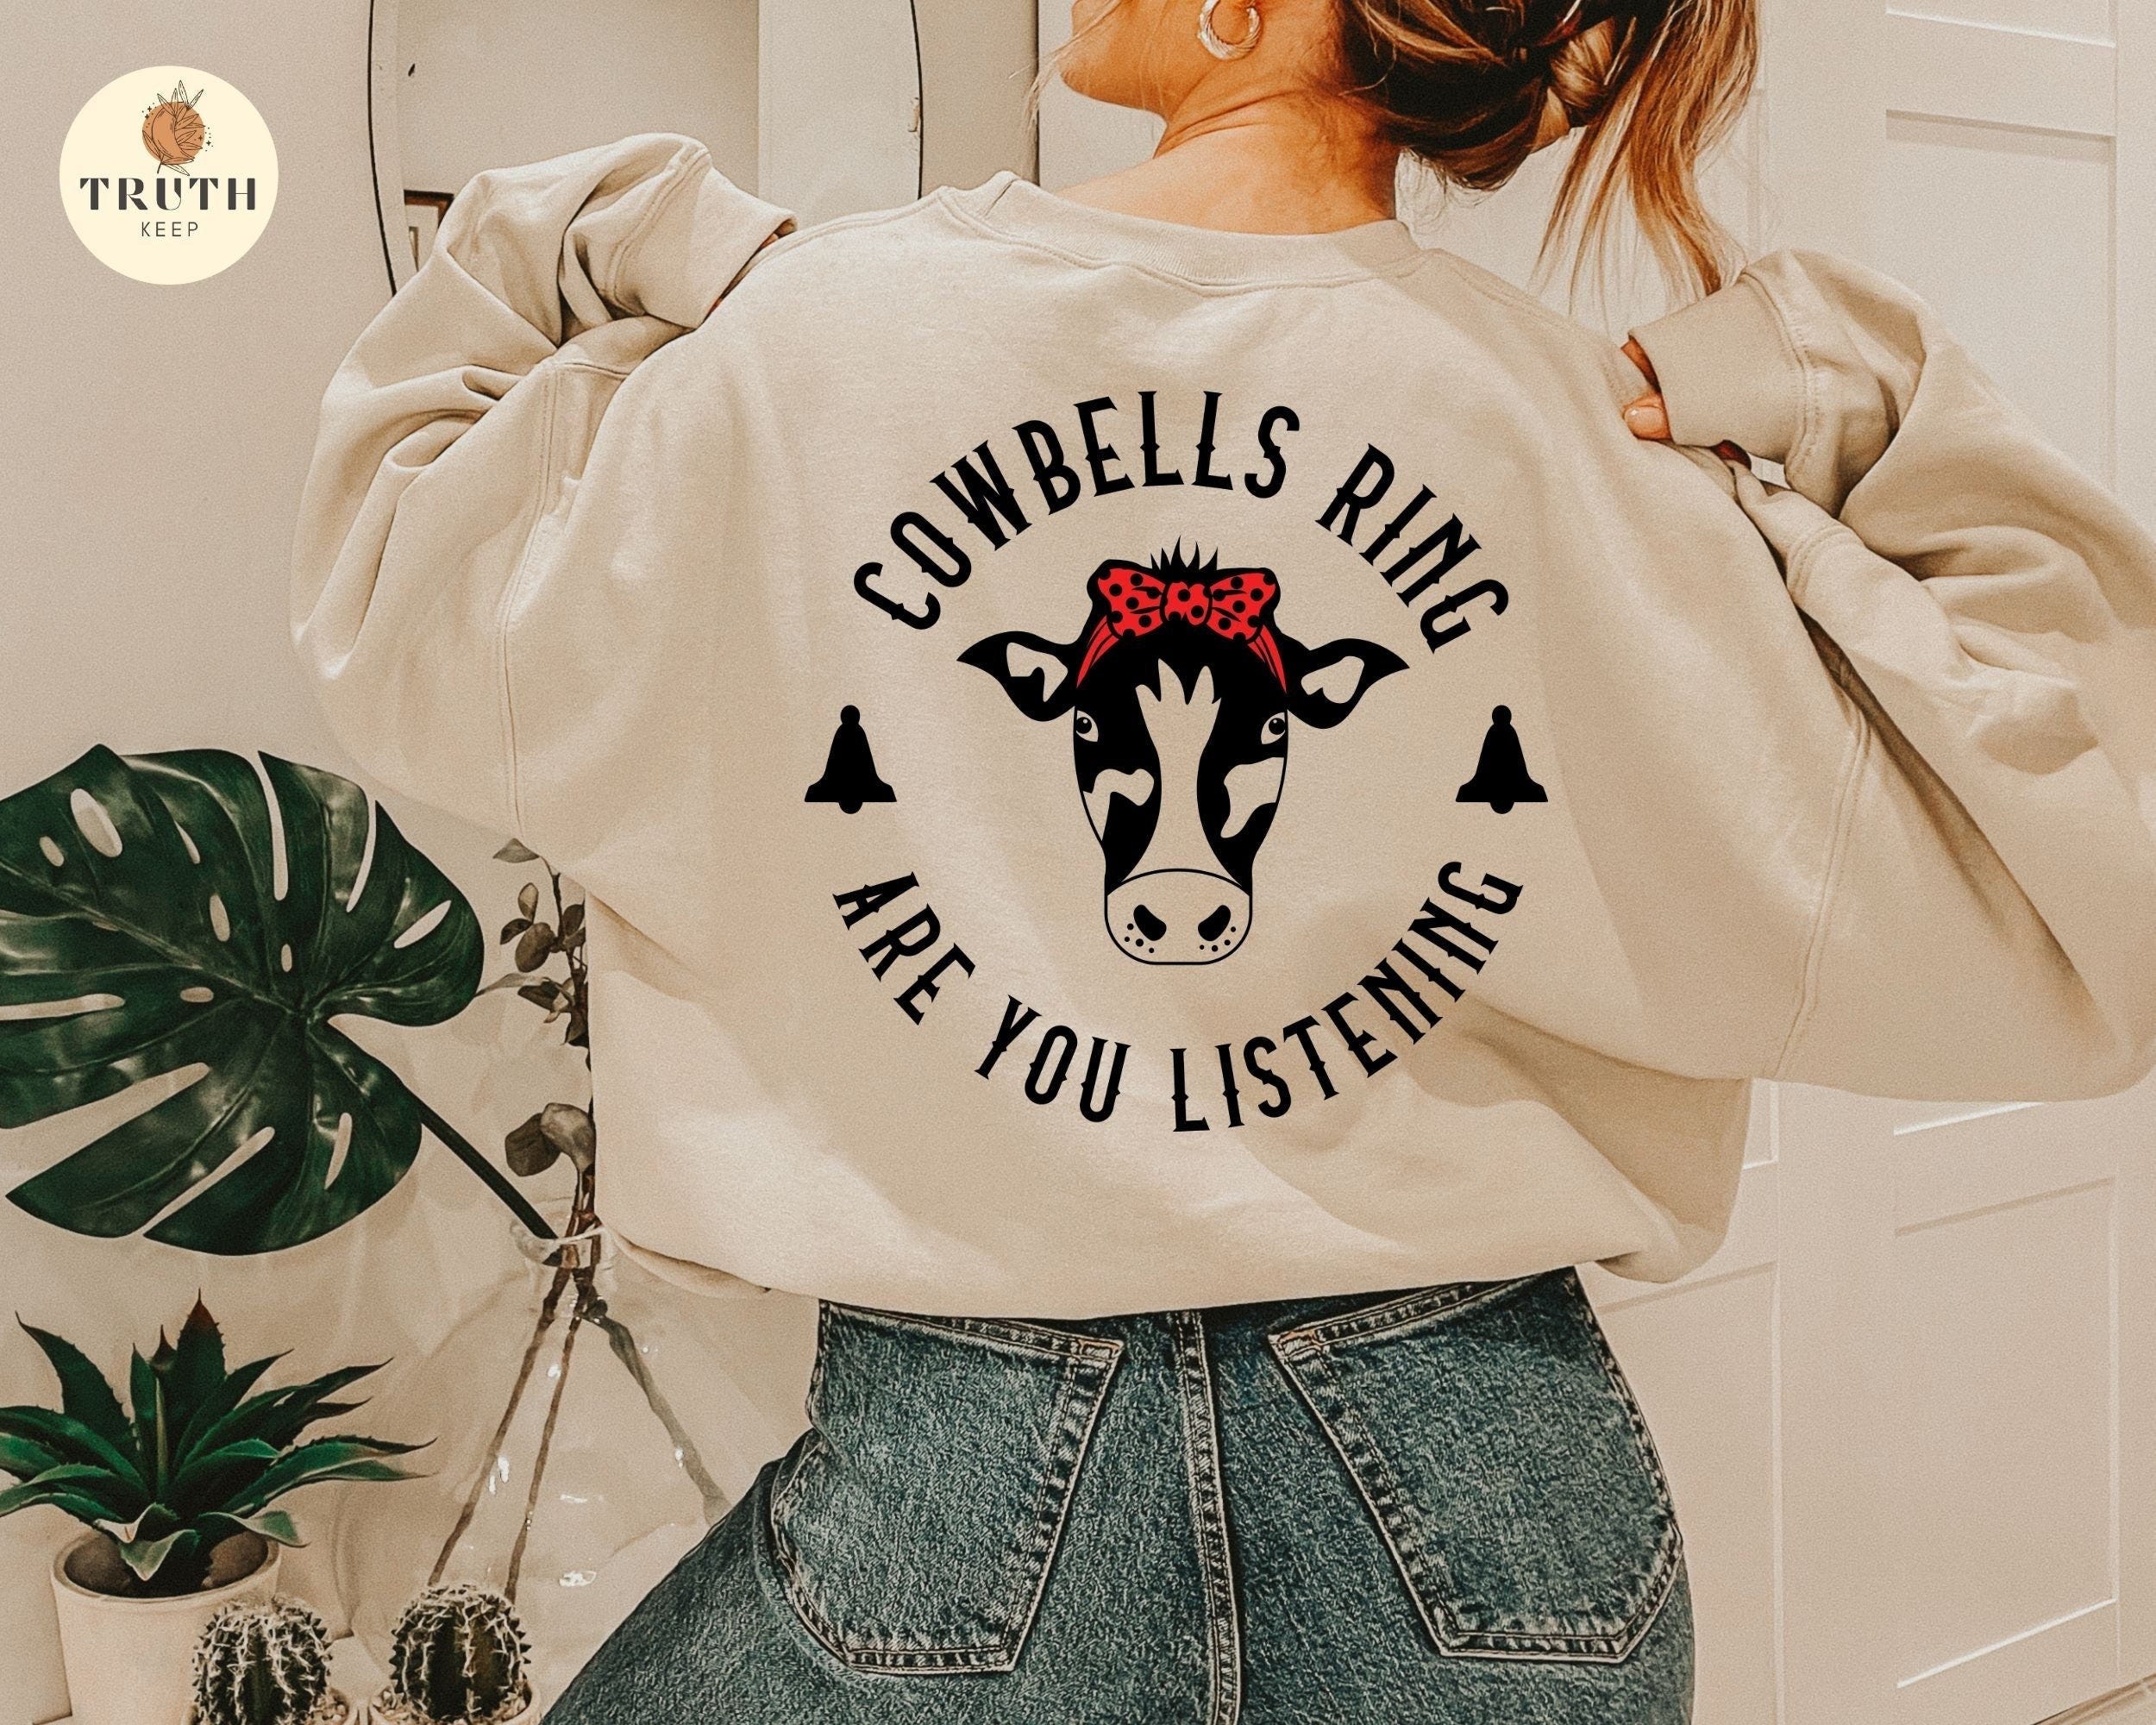 Cowbells ring are you listening svg png,Mooey Christmas svg,Christmas cow svg shirt,Cow door sign svg, Sublimation file for shirt design.